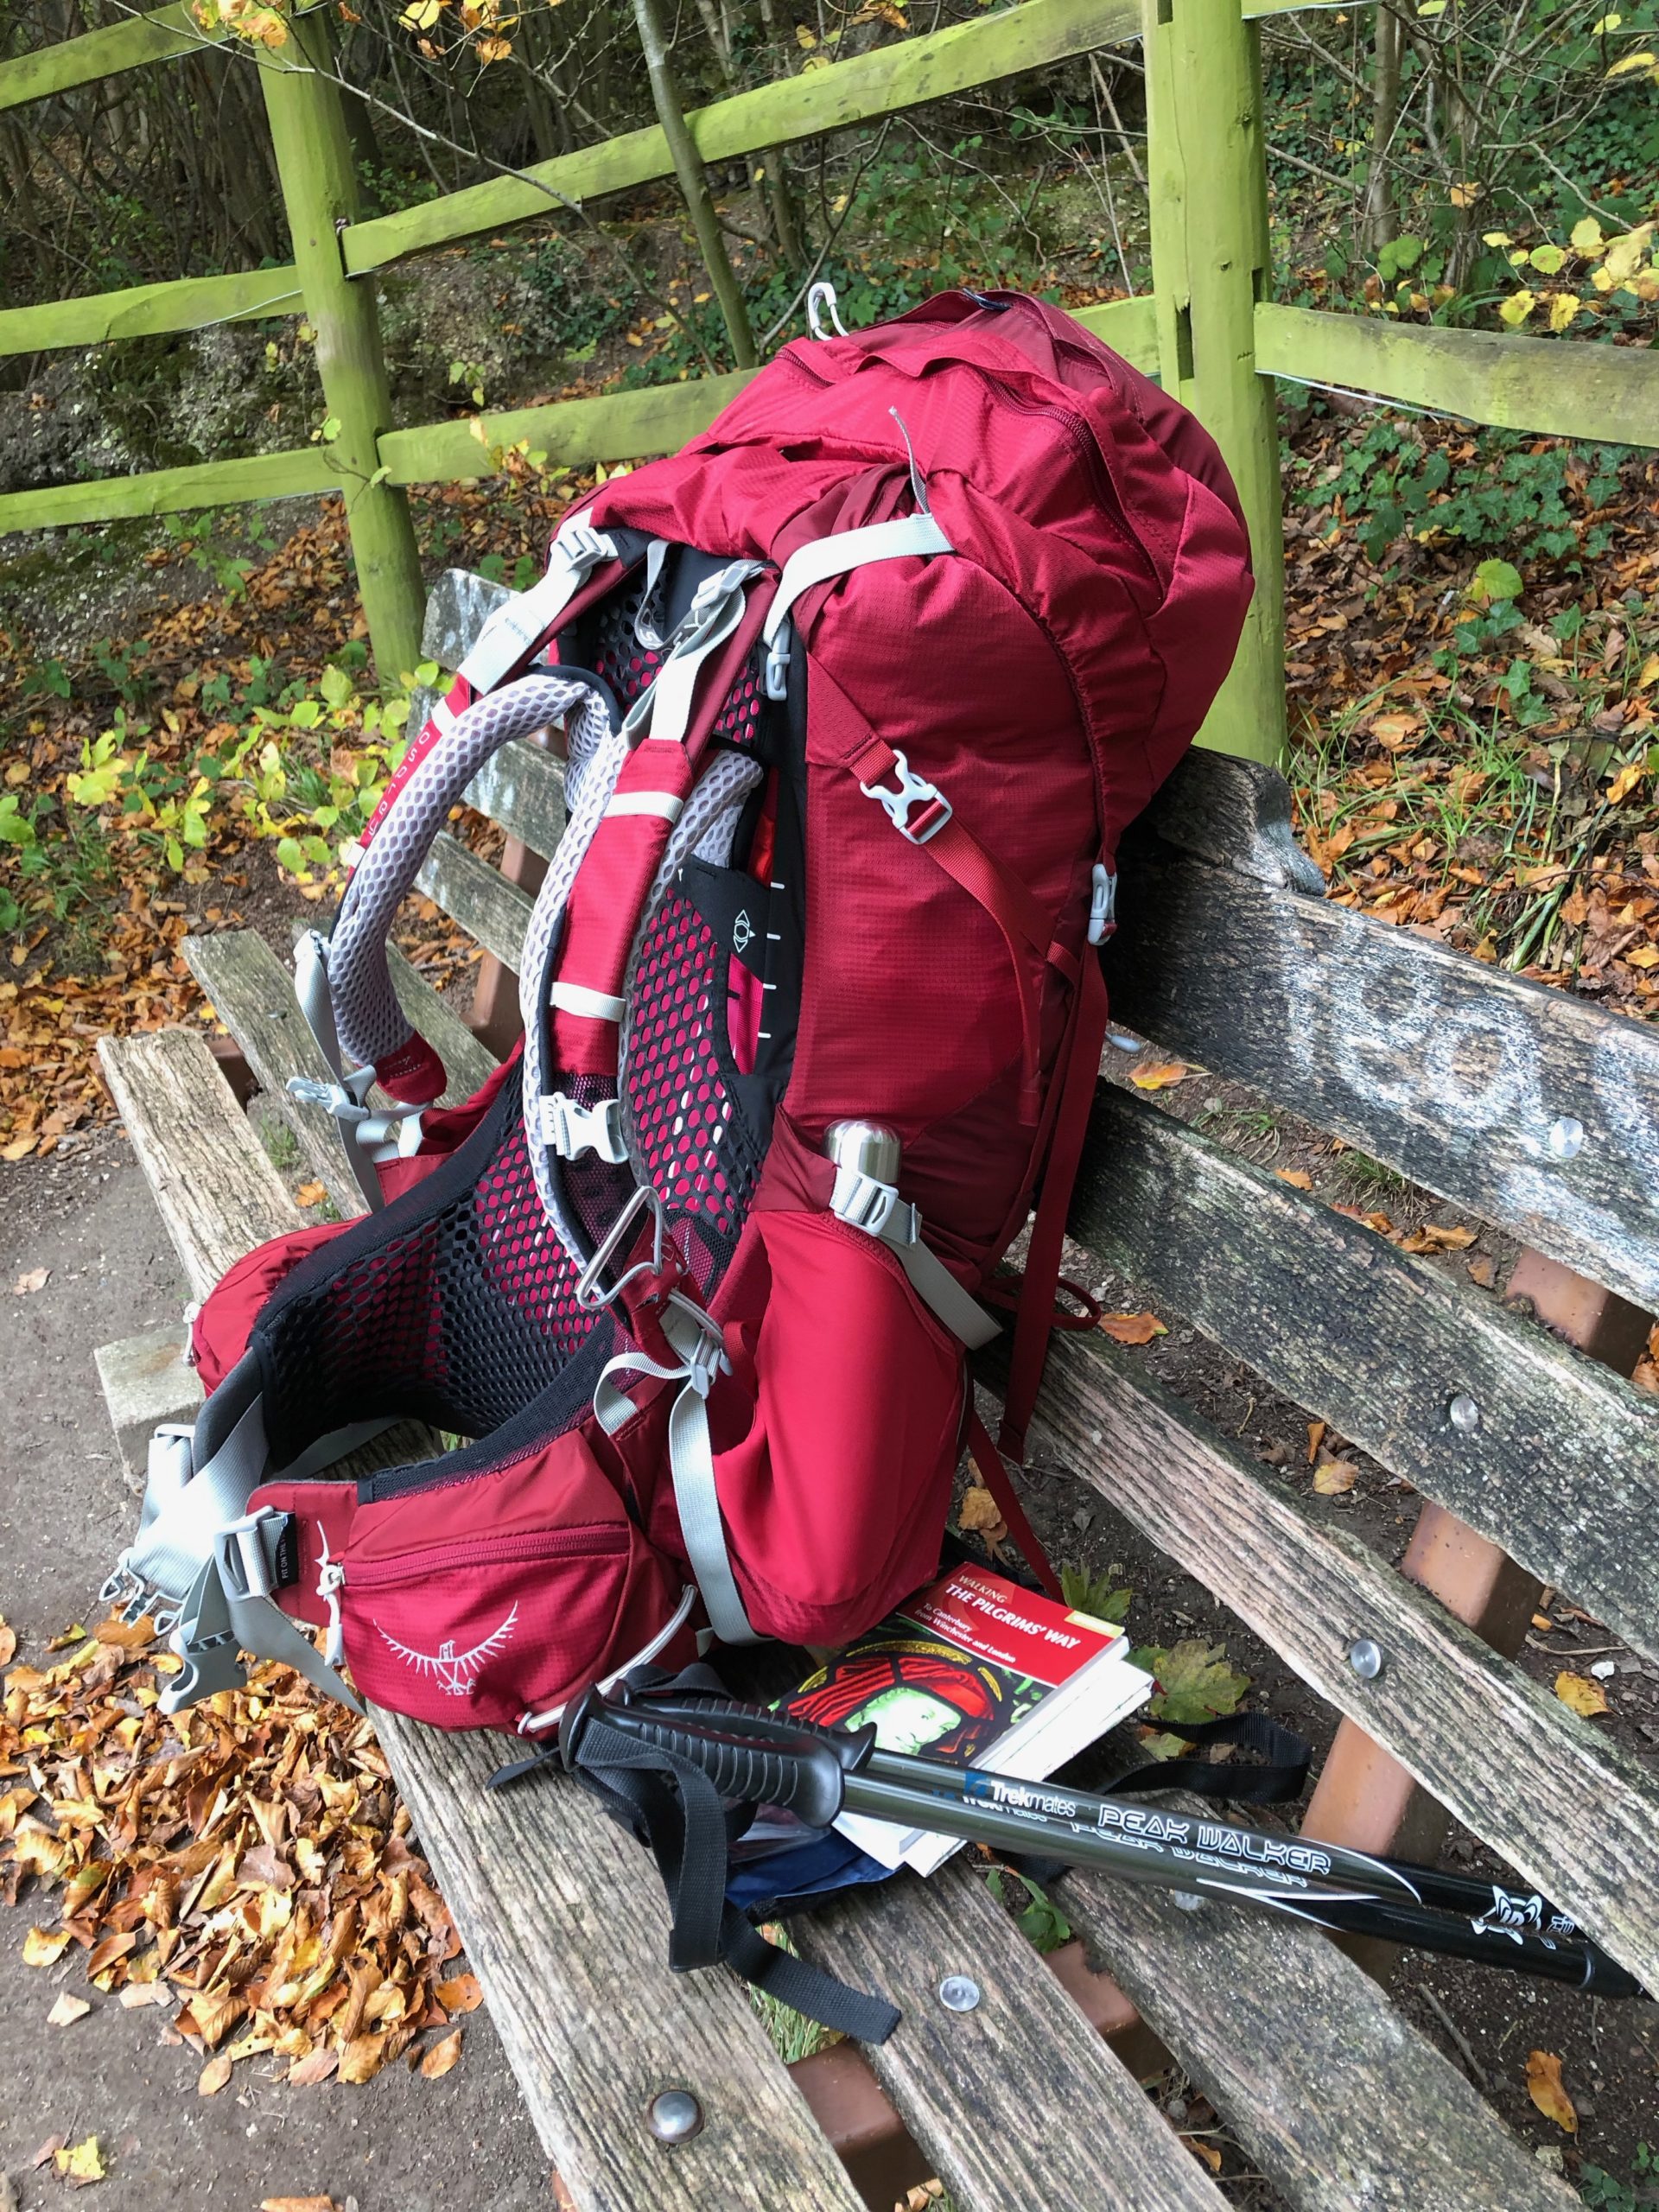 My Kit List For A Multi-Day Hike - Books And Travel